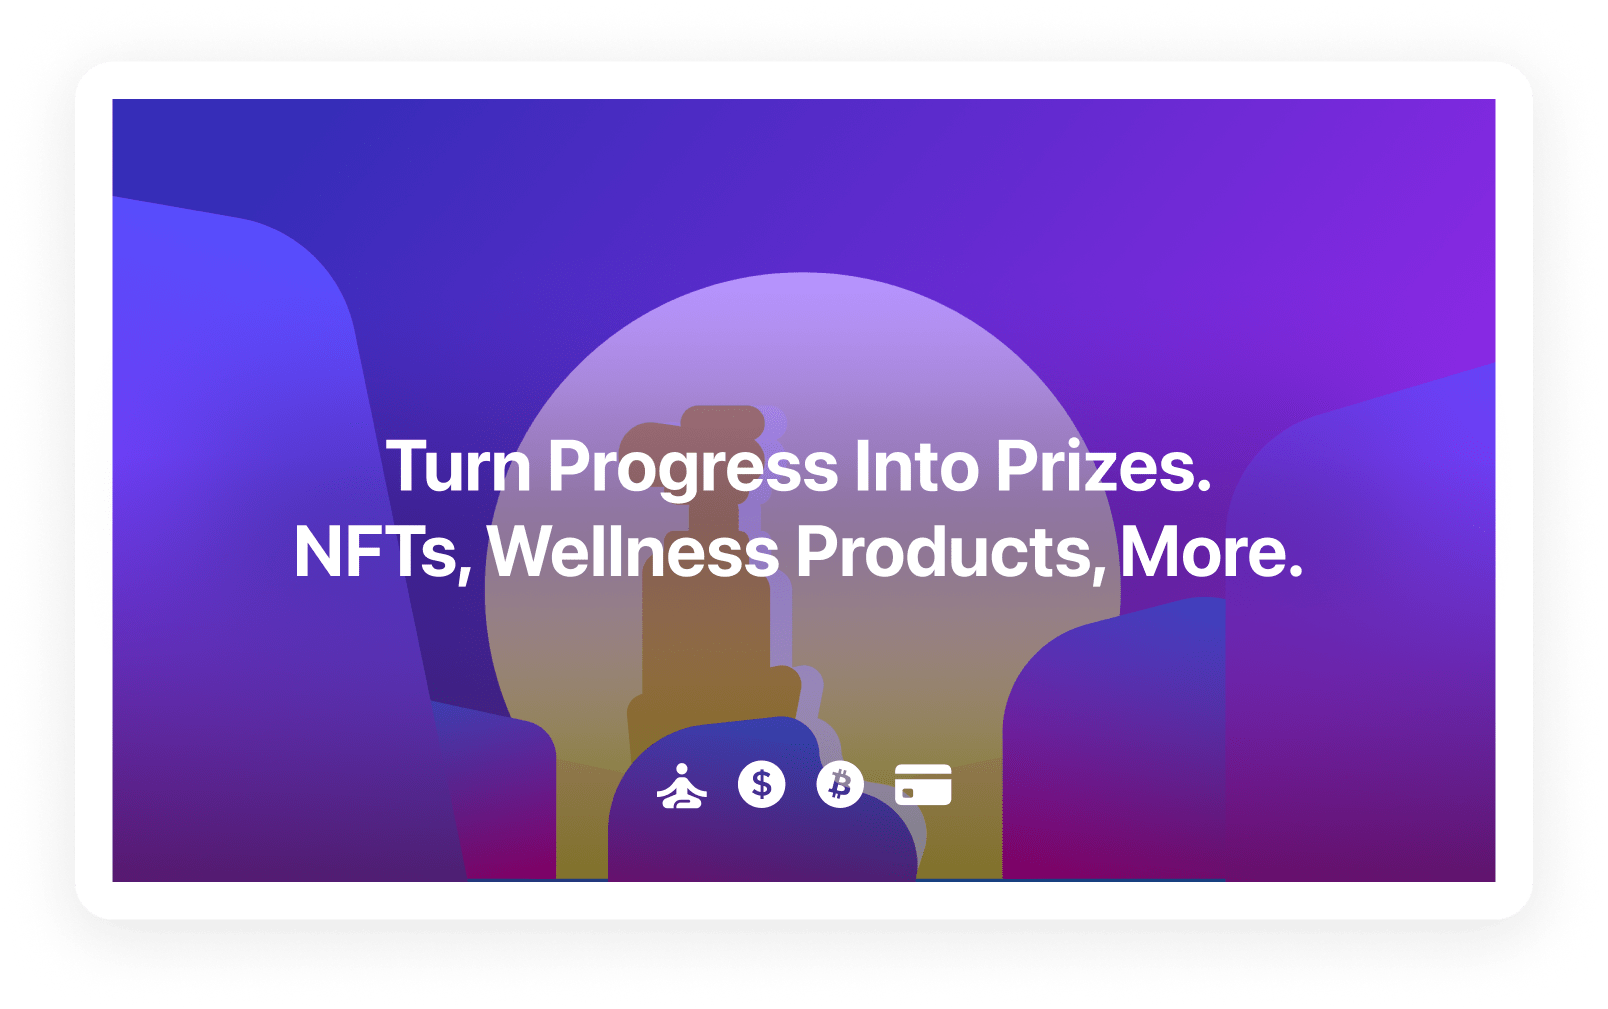 Turn Progress Into Prizes. NFTs, Wellness Products, More.